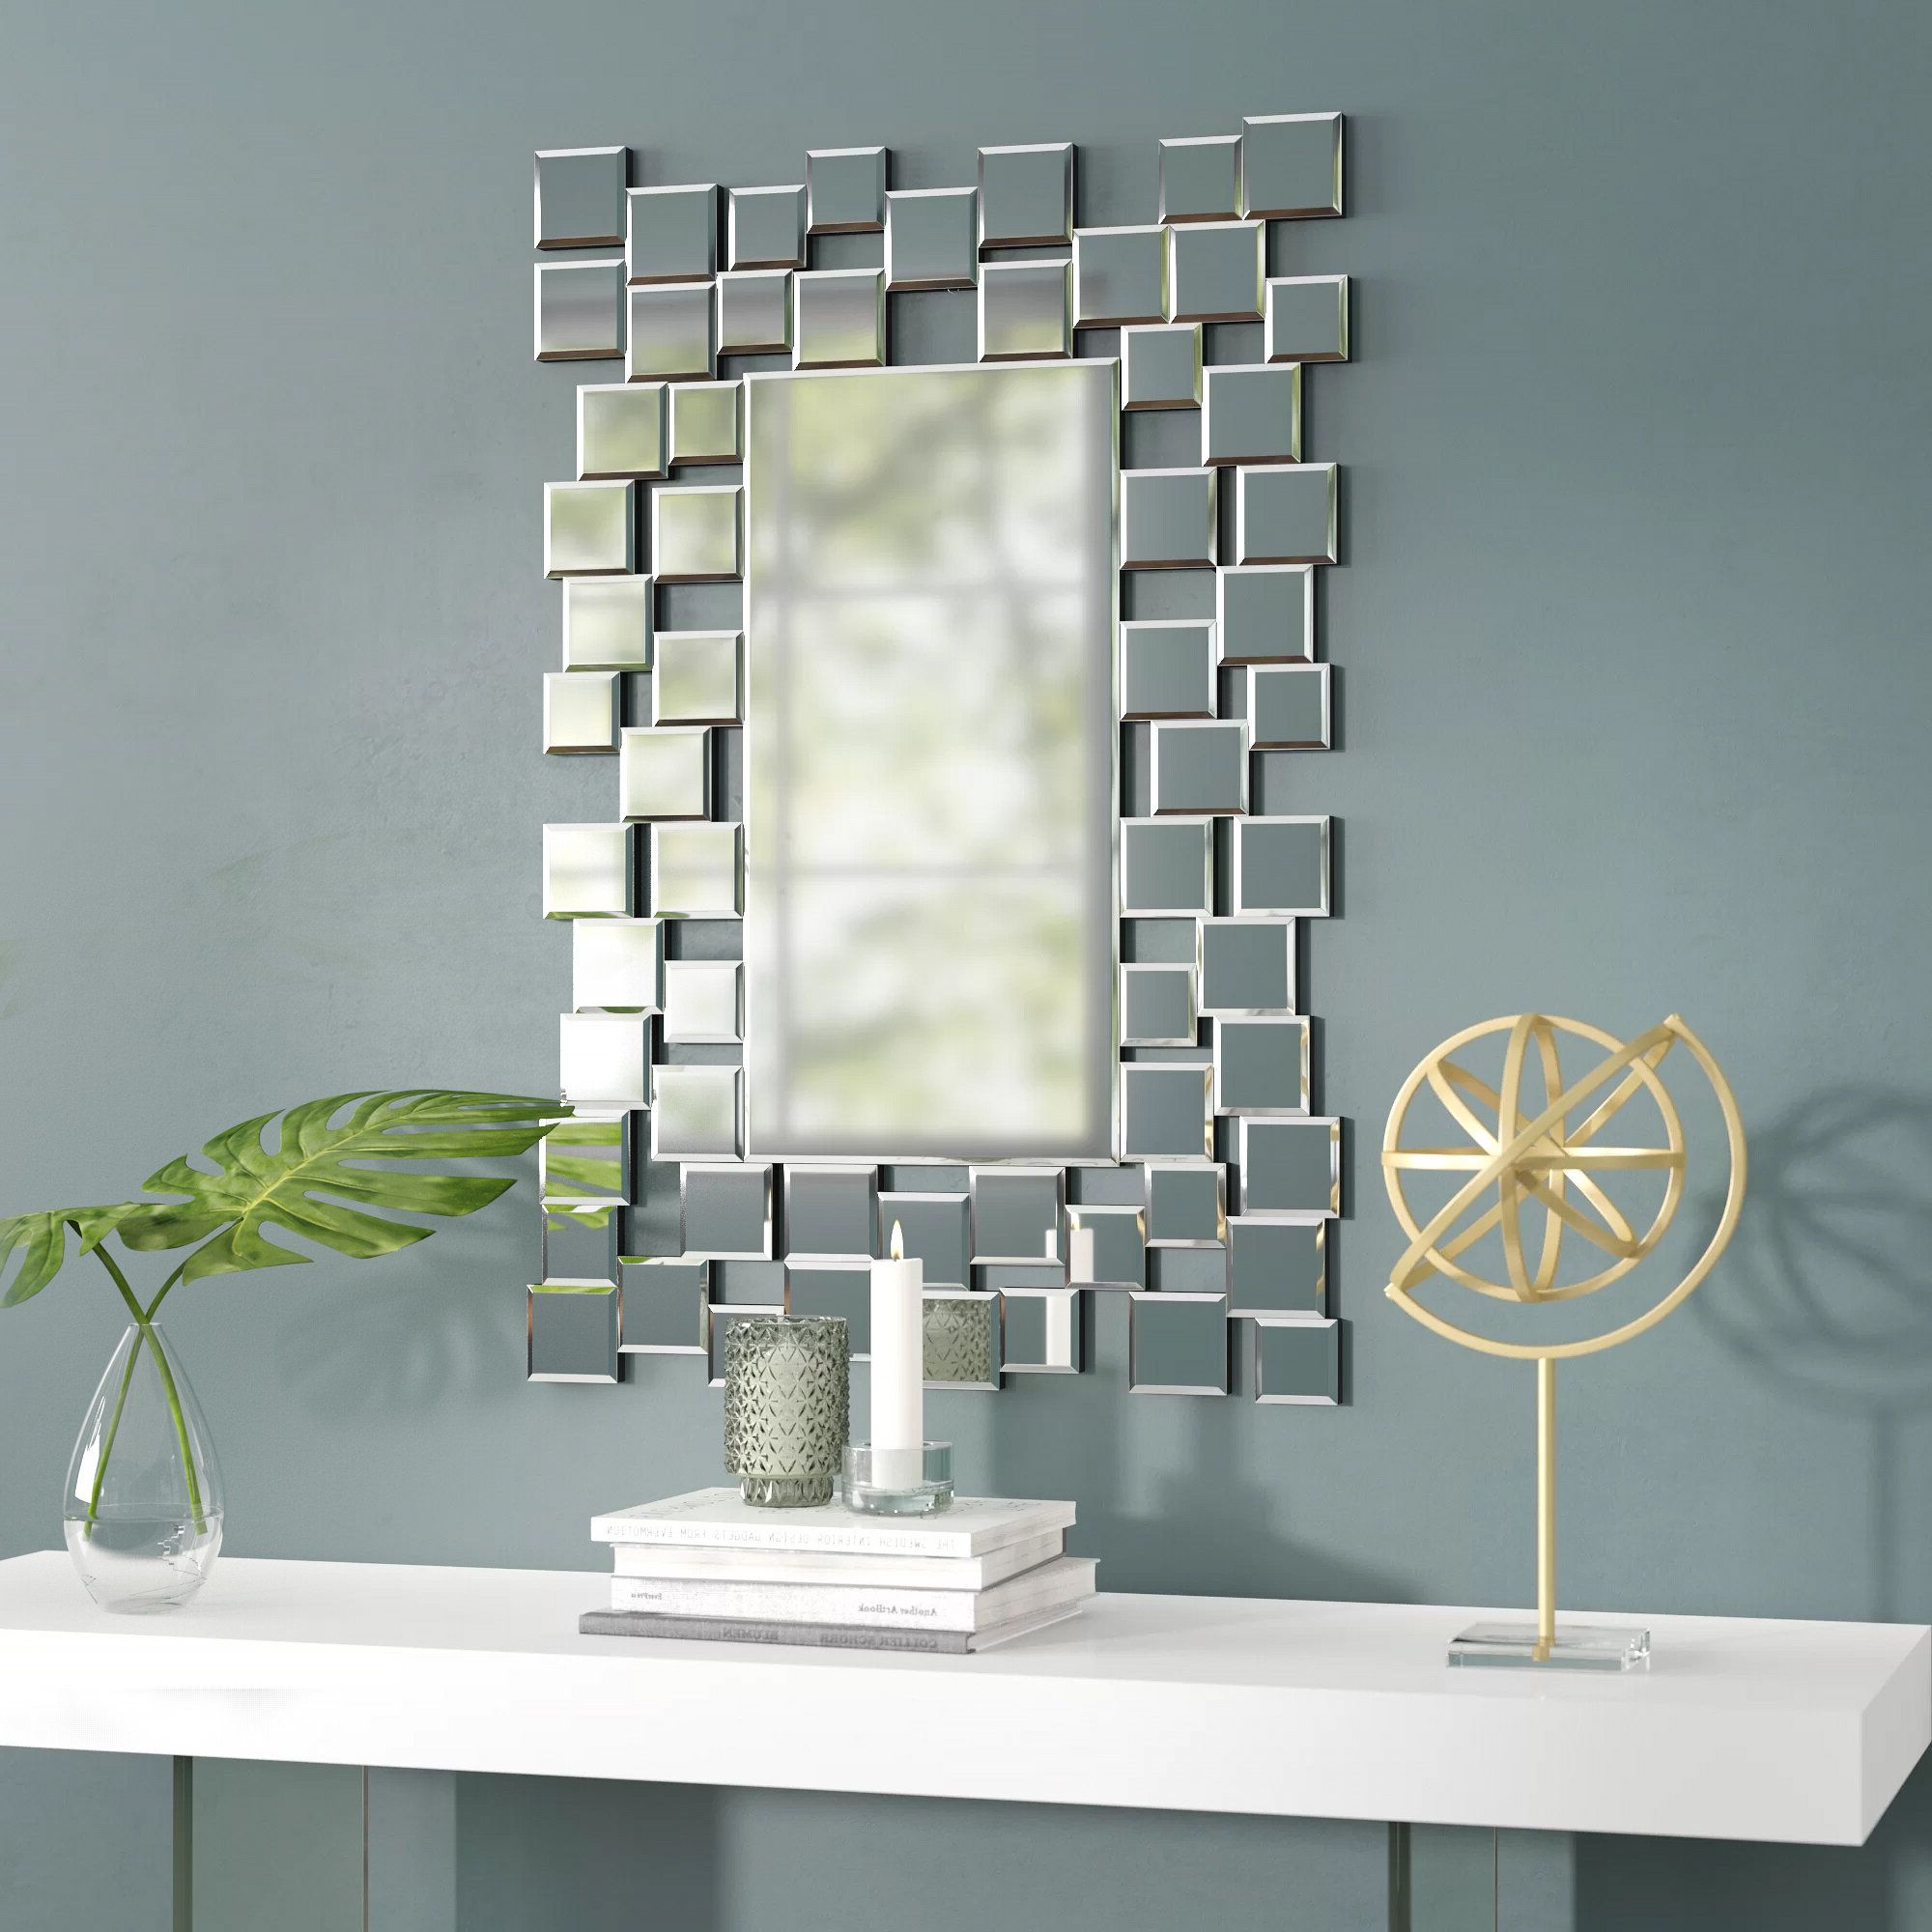 Menachem Modern & Contemporary Accent Mirrors Inside Recent Brayden Studio Modern & Contemporary Accent Wall Mirror (View 20 of 20)